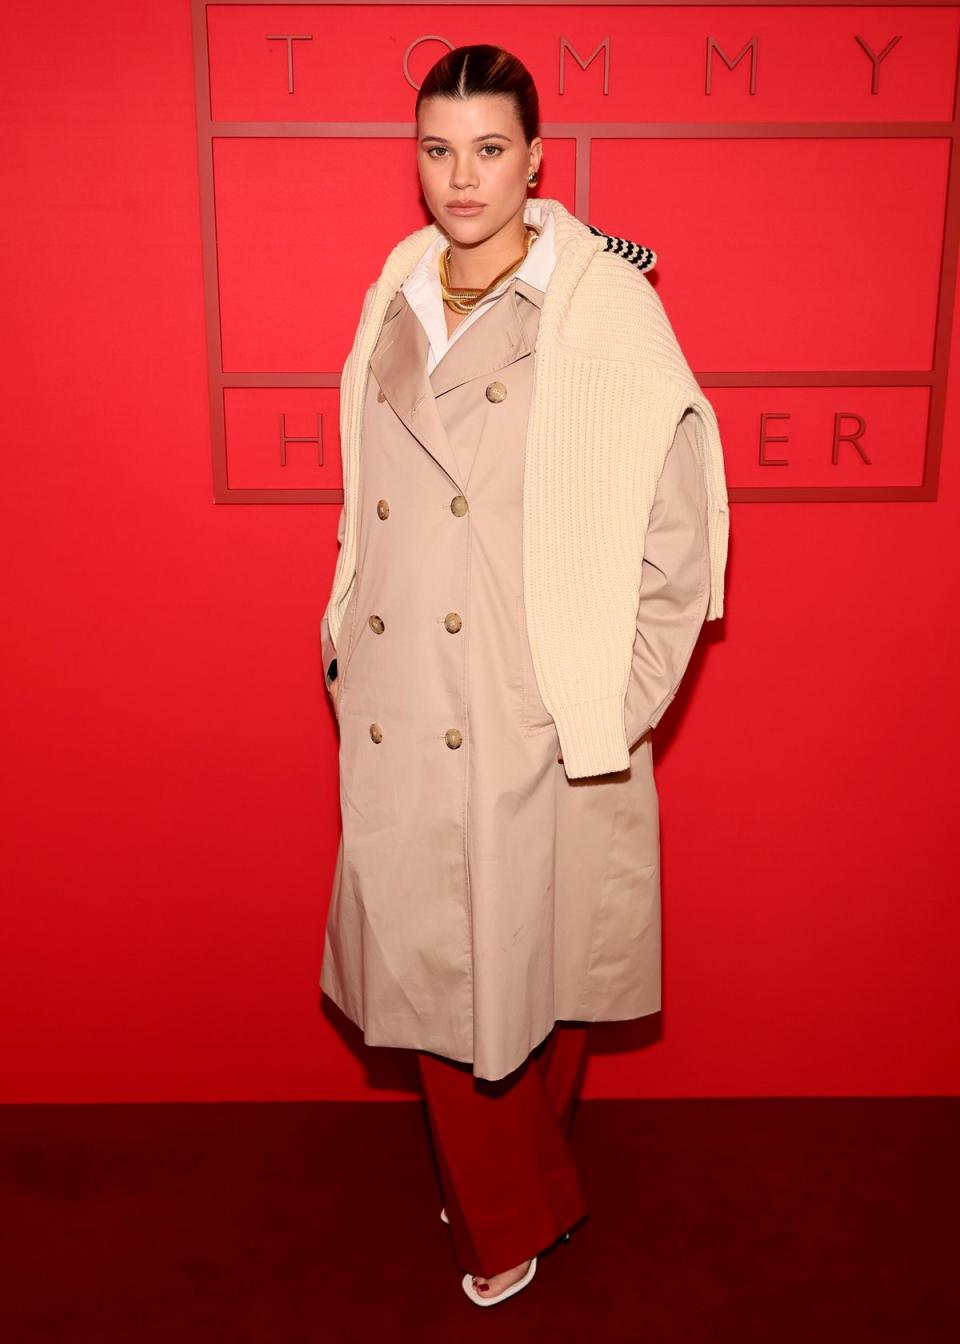 Sofia Richie Grainge at the Tommy Hilfiger show (Getty Images)